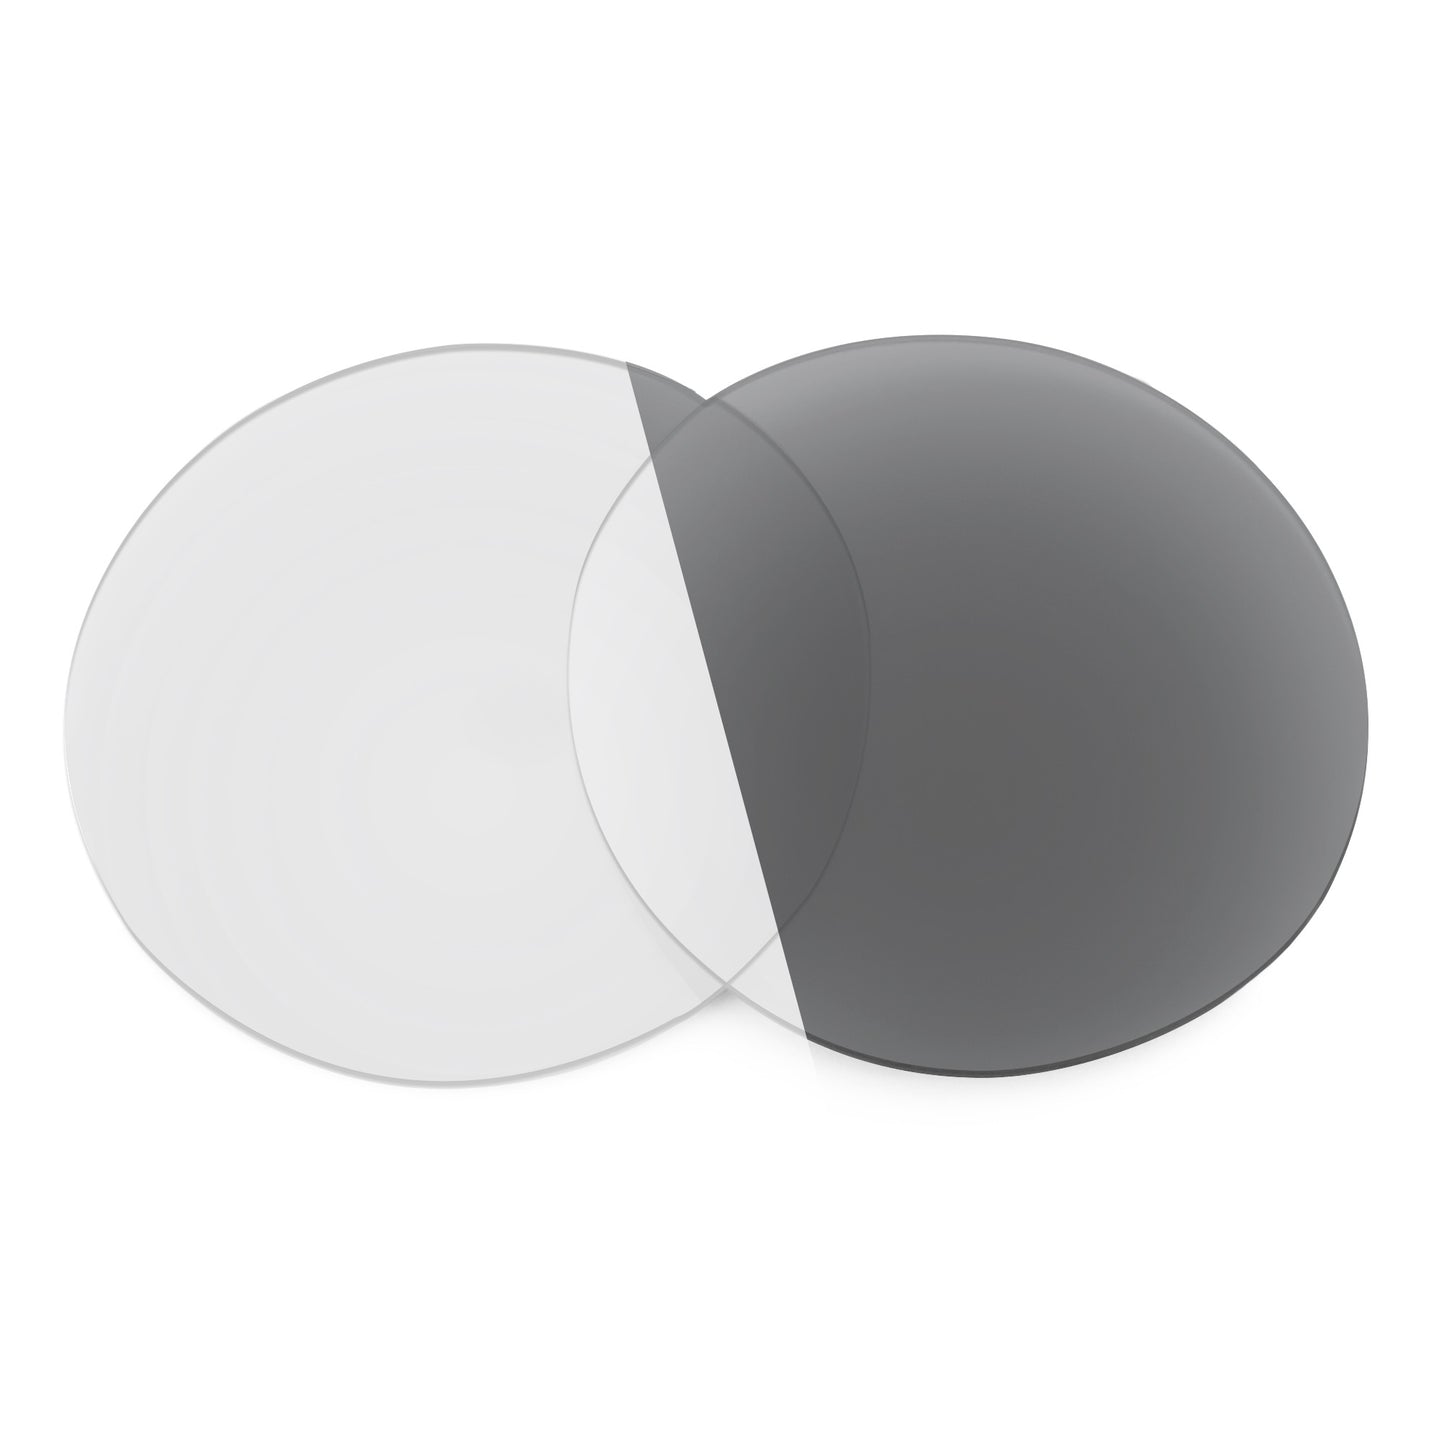 Revant replacement lenses for Ray-Ban RB4371 55mm Non-Polarized Adapt Gray Photochromic